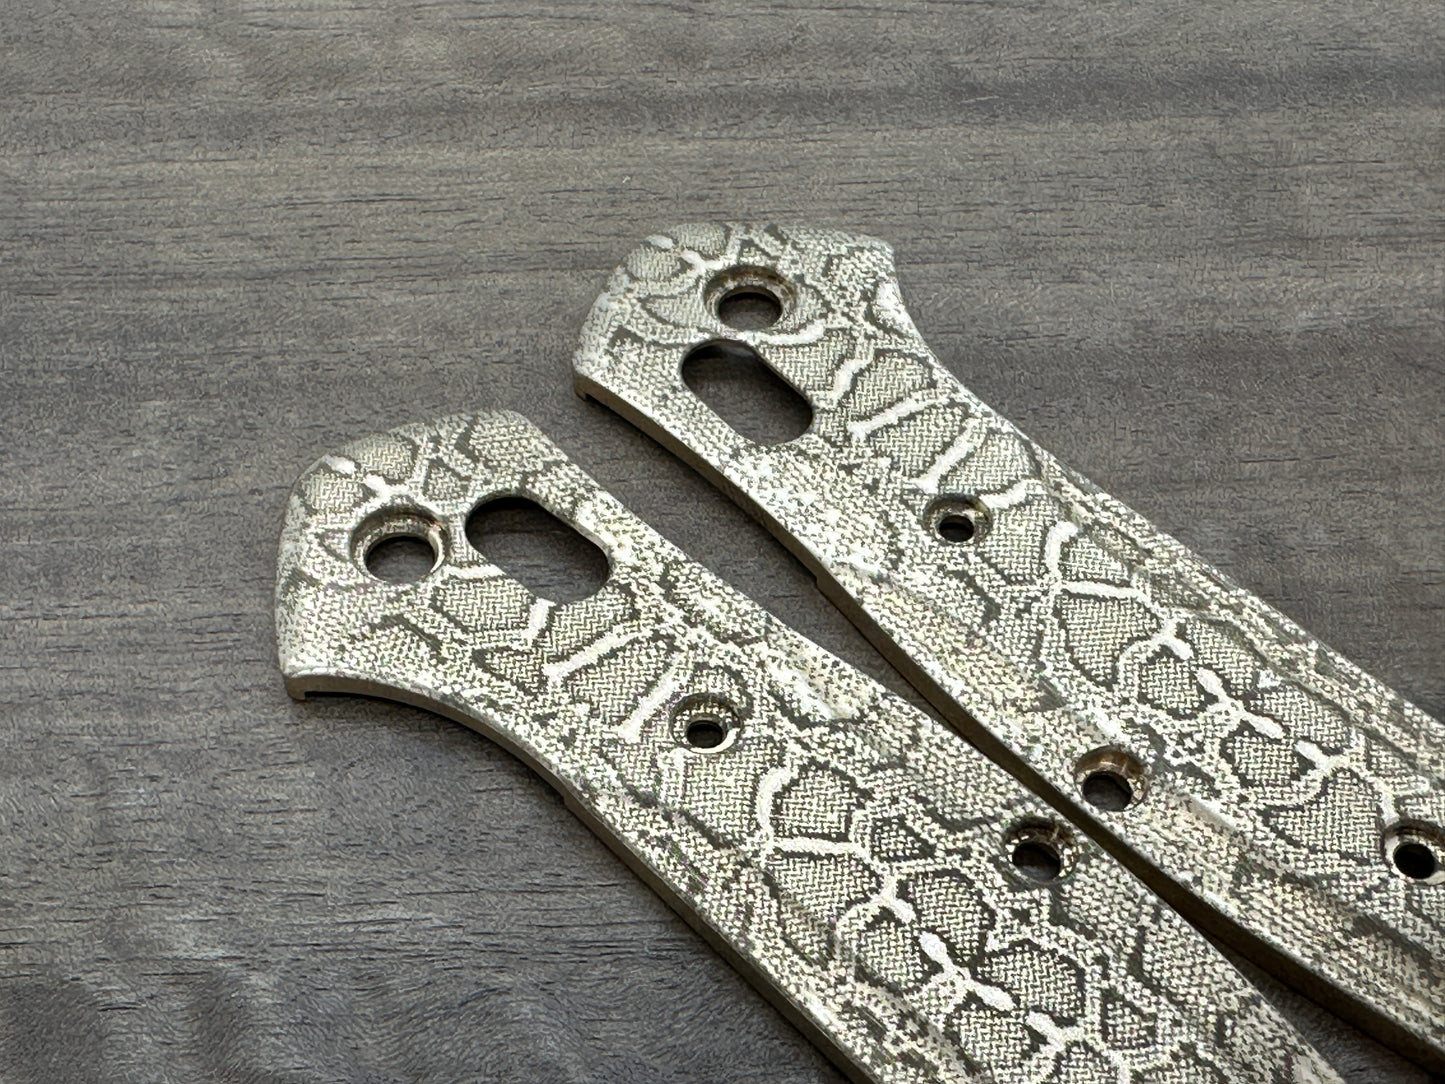 REPTILIAN engraved Brass Scales for Benchmade 940 Osborne